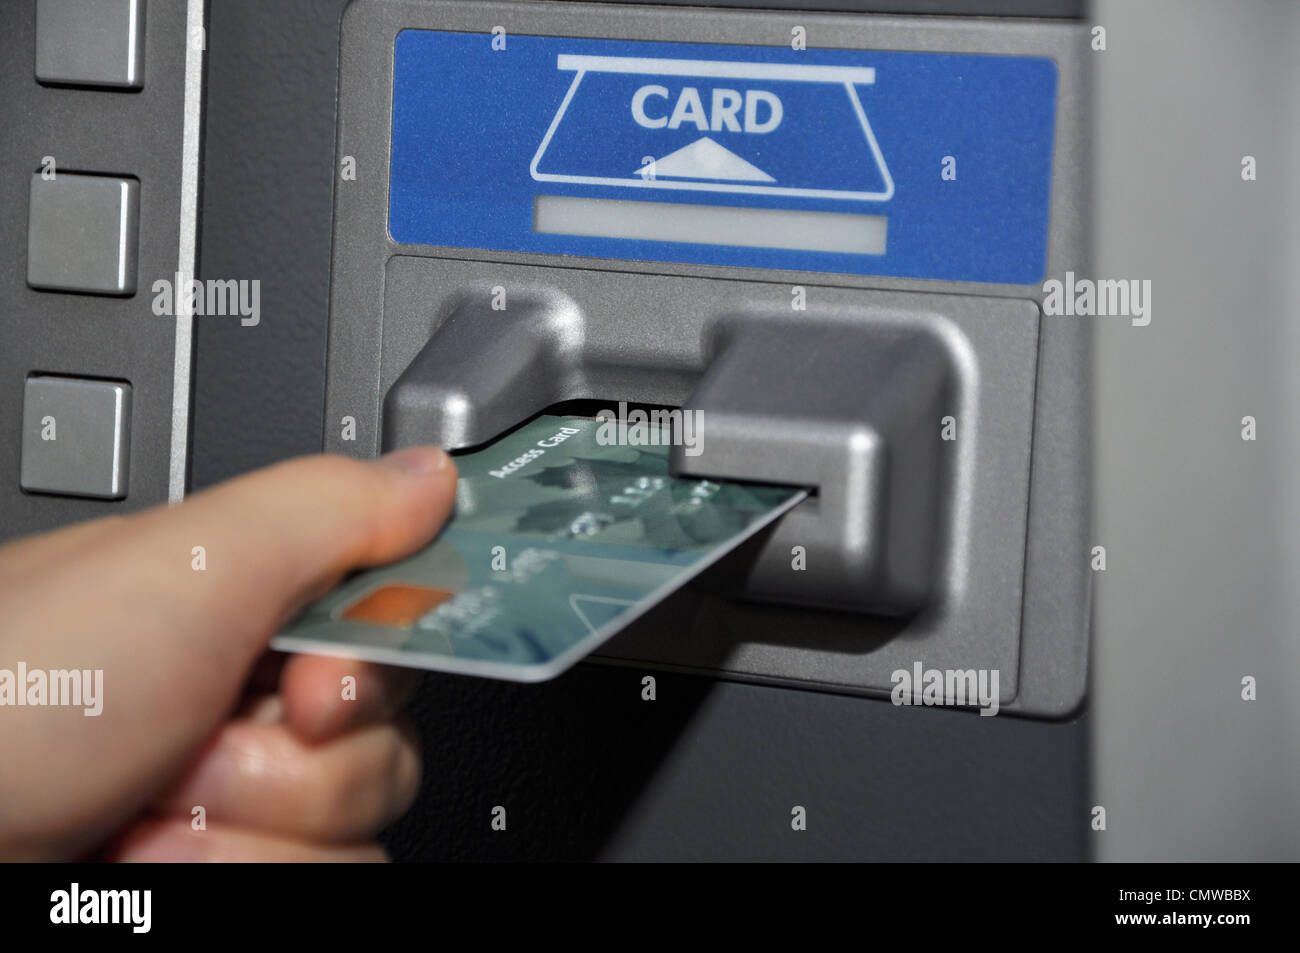 Withdraw money from ATM machine Stock Photo